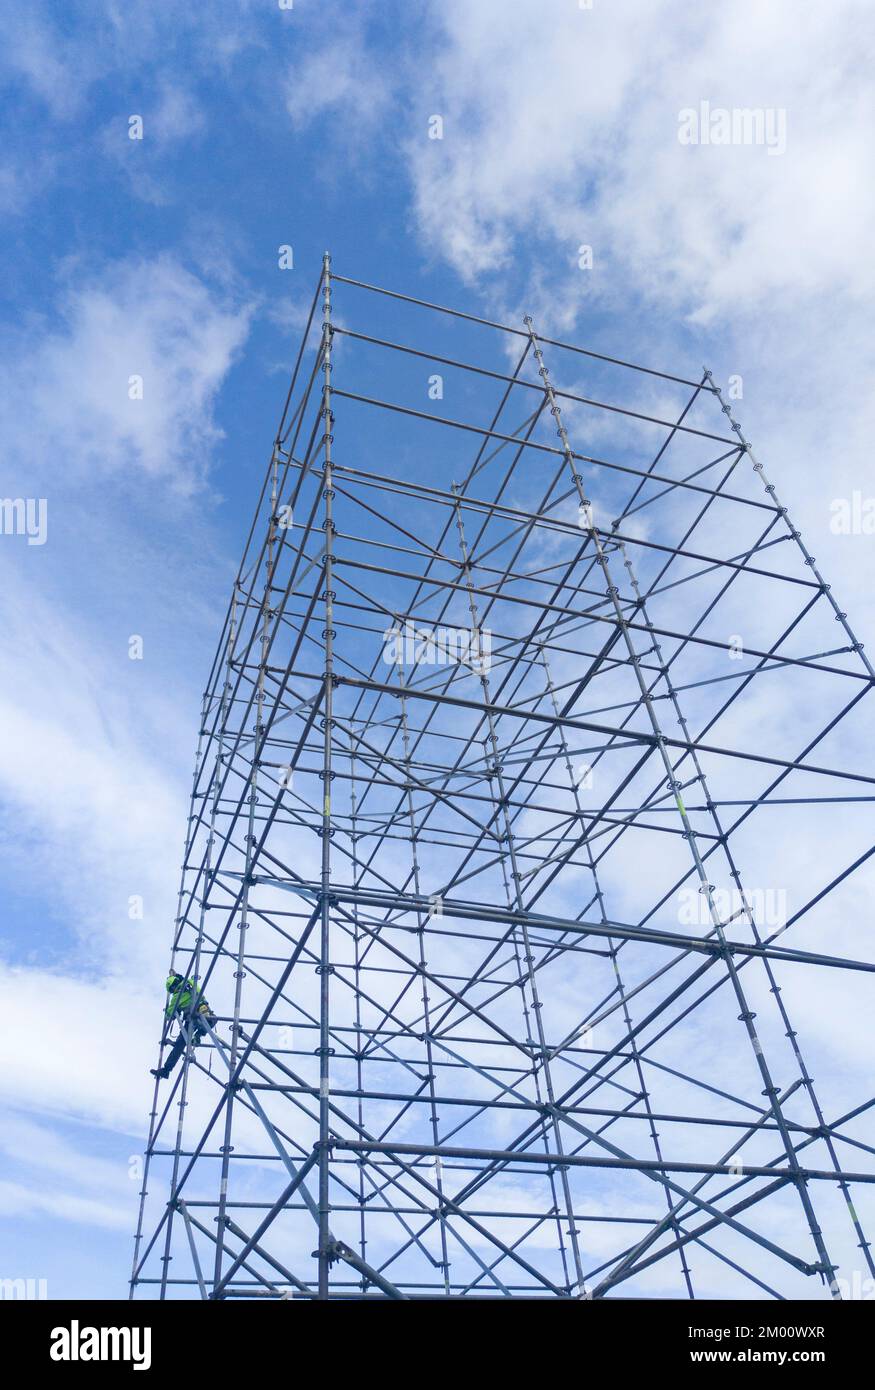 Unidentified worker at height dismantling a scaffolding tower. Blue cloudy sky on background. Stock Photo